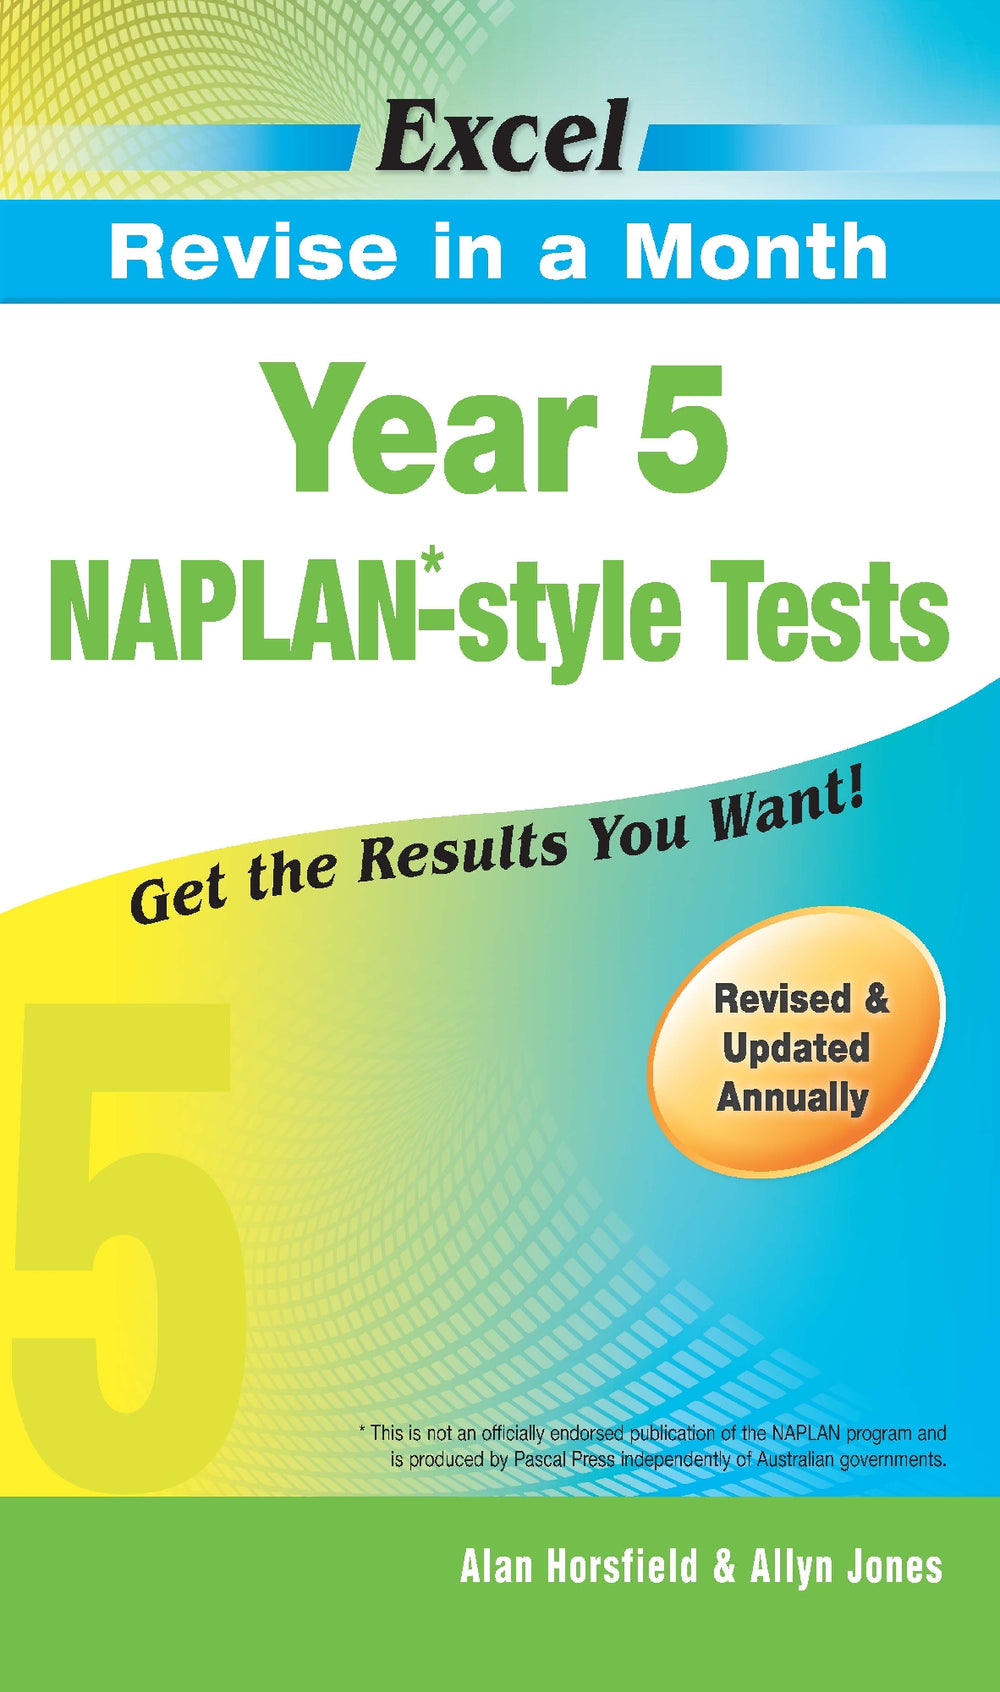 Excel Revise in a Month NAPLAN*-style Tests Year 5